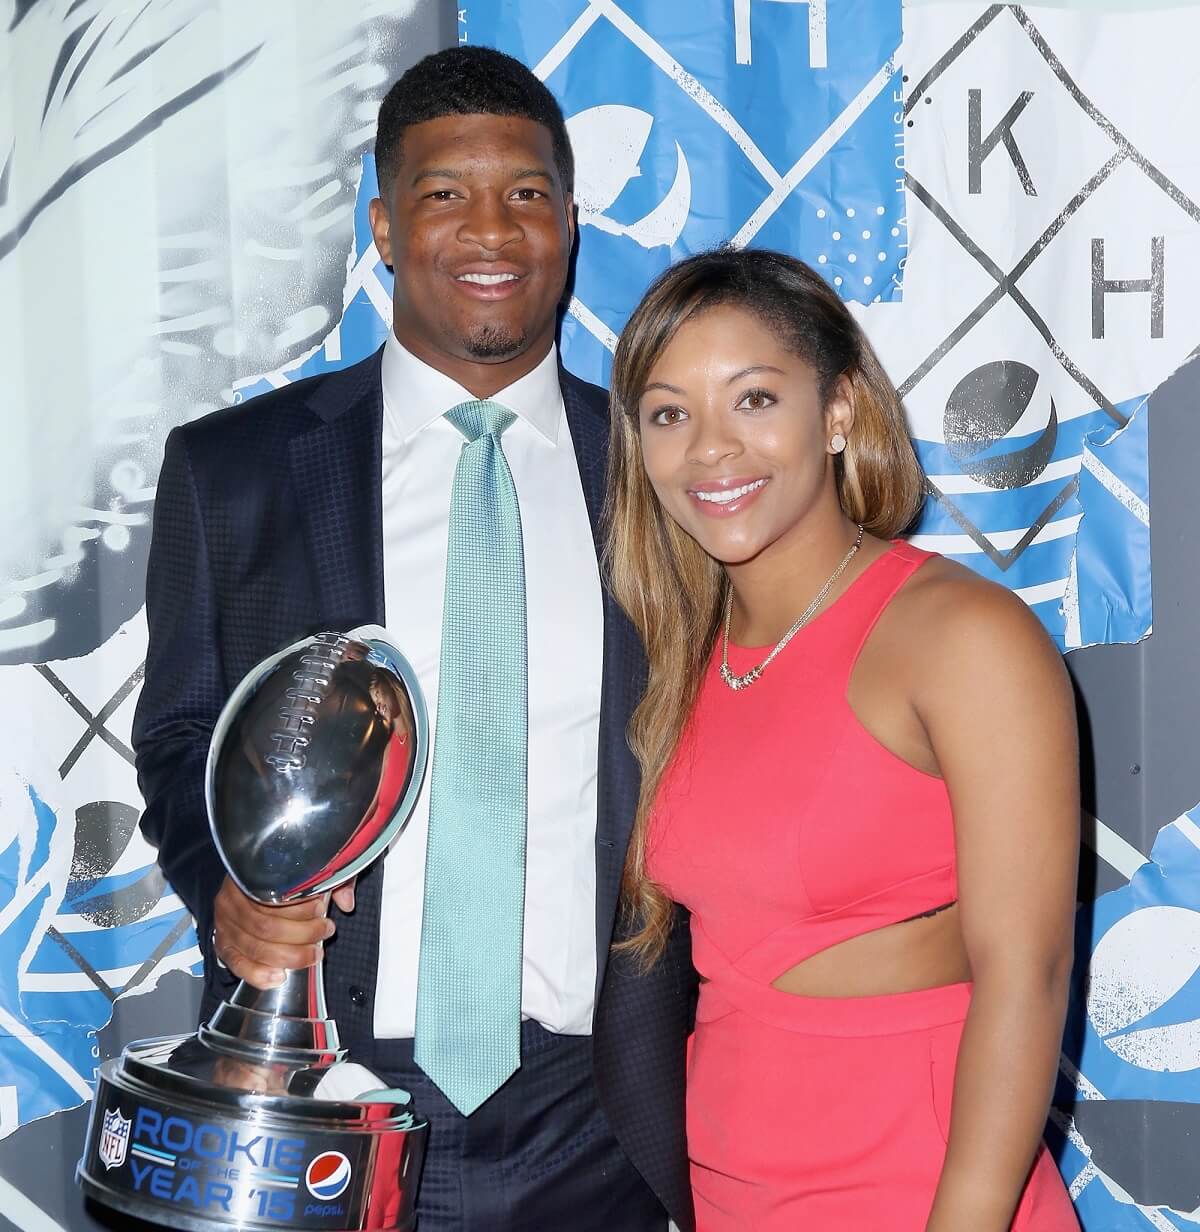 Jameis Winston, recipient of the Pepsi Rookie of the Year Award, and Breion Allen pose on the Blue Carpet together